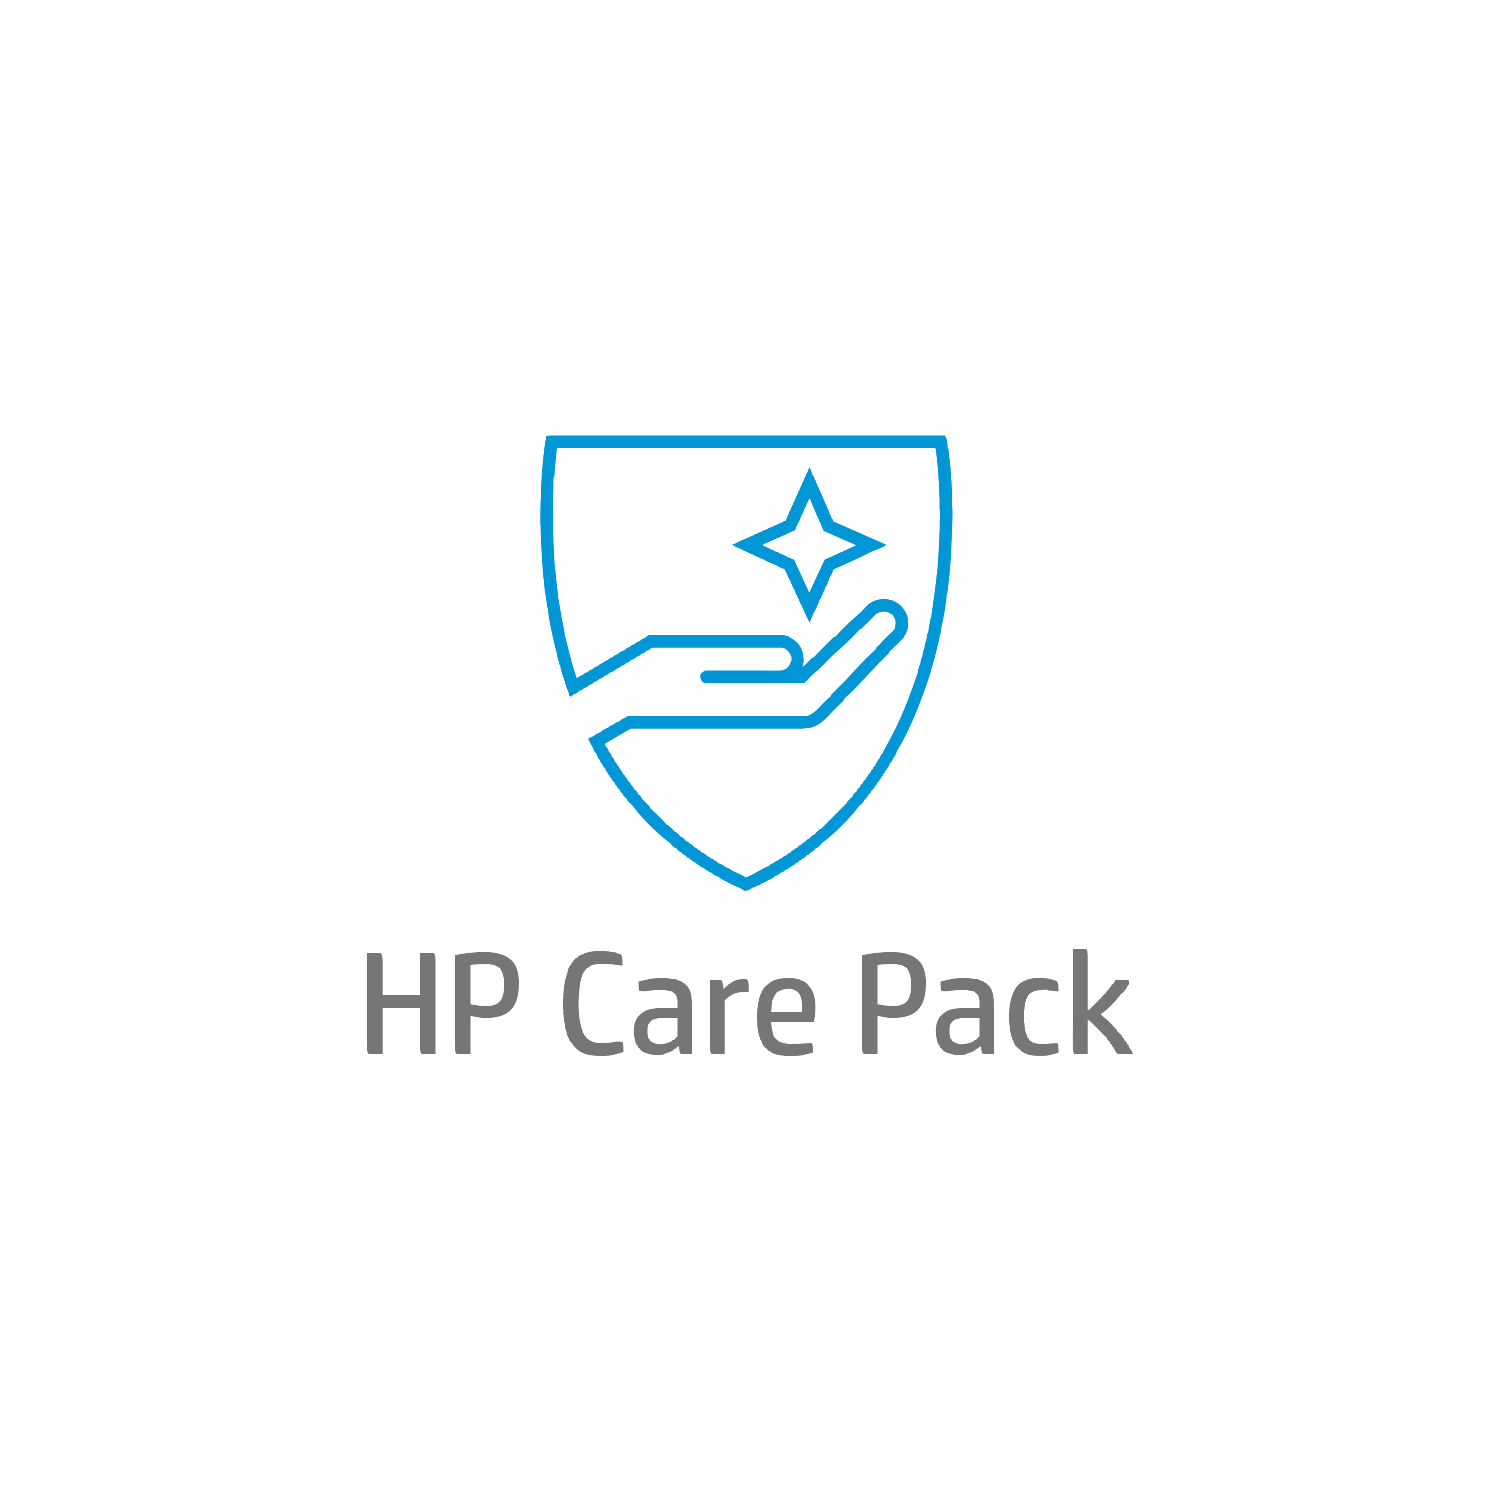 Bild von HP 4y Active Care Next Business Day Response Onsite w/1x DLE MWS HW Supp, Active Care, Remote and Onsite, In warranty, Standard workdays - 9 hours, 4 years, Next business day response